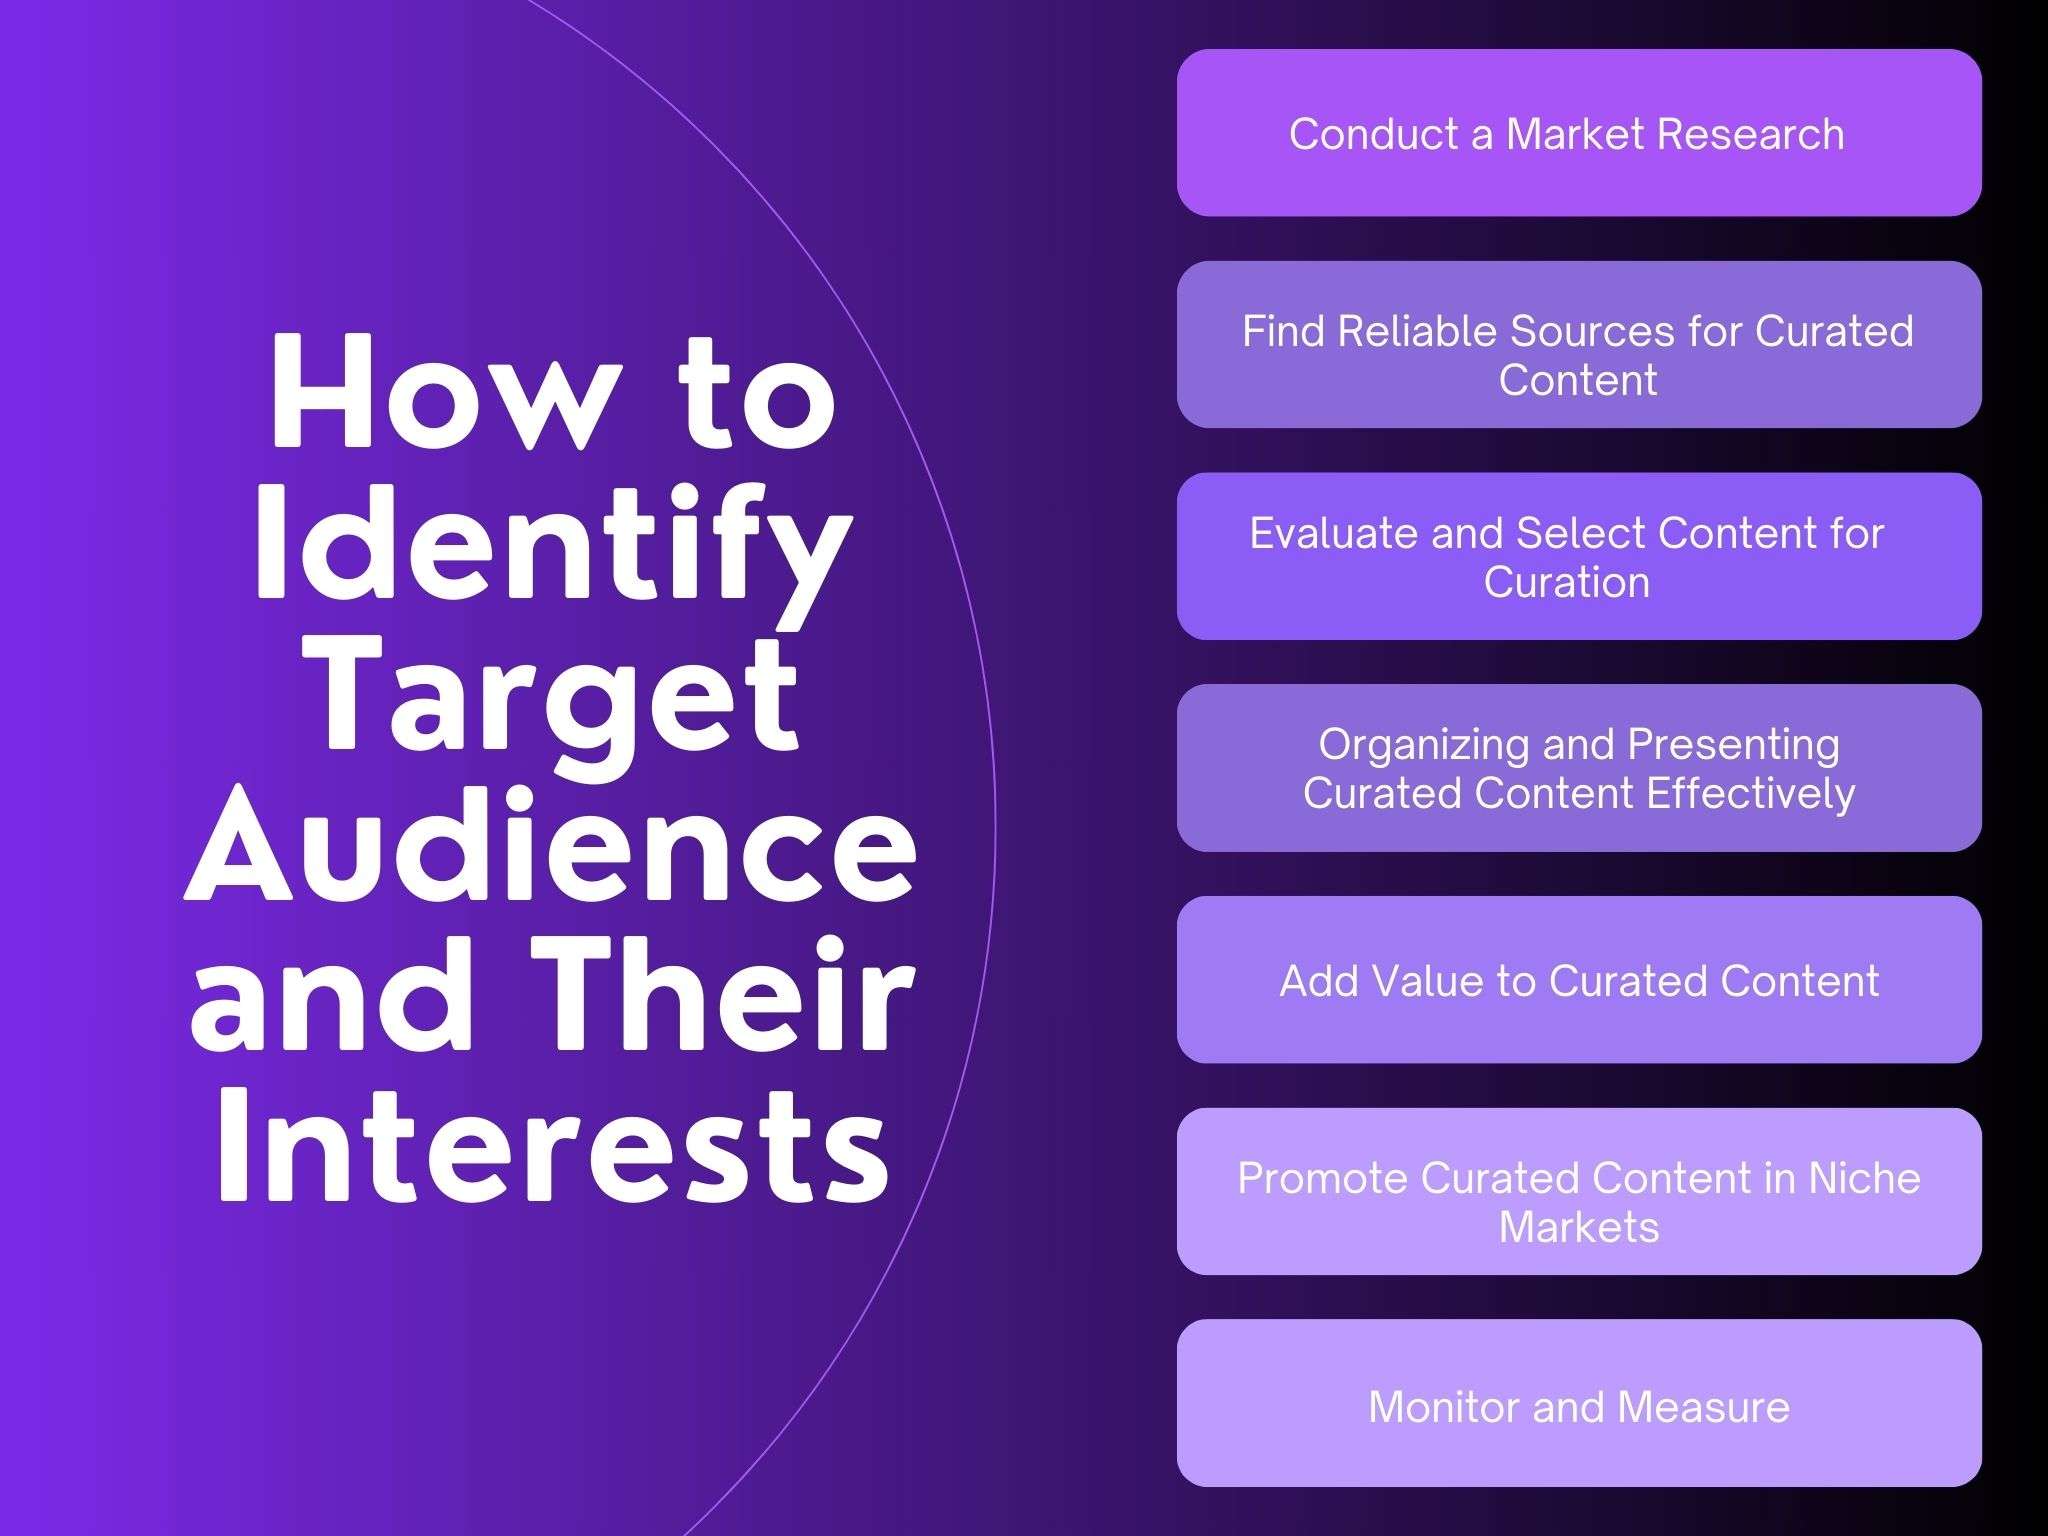 How to Identify Target Audience and Their Interests